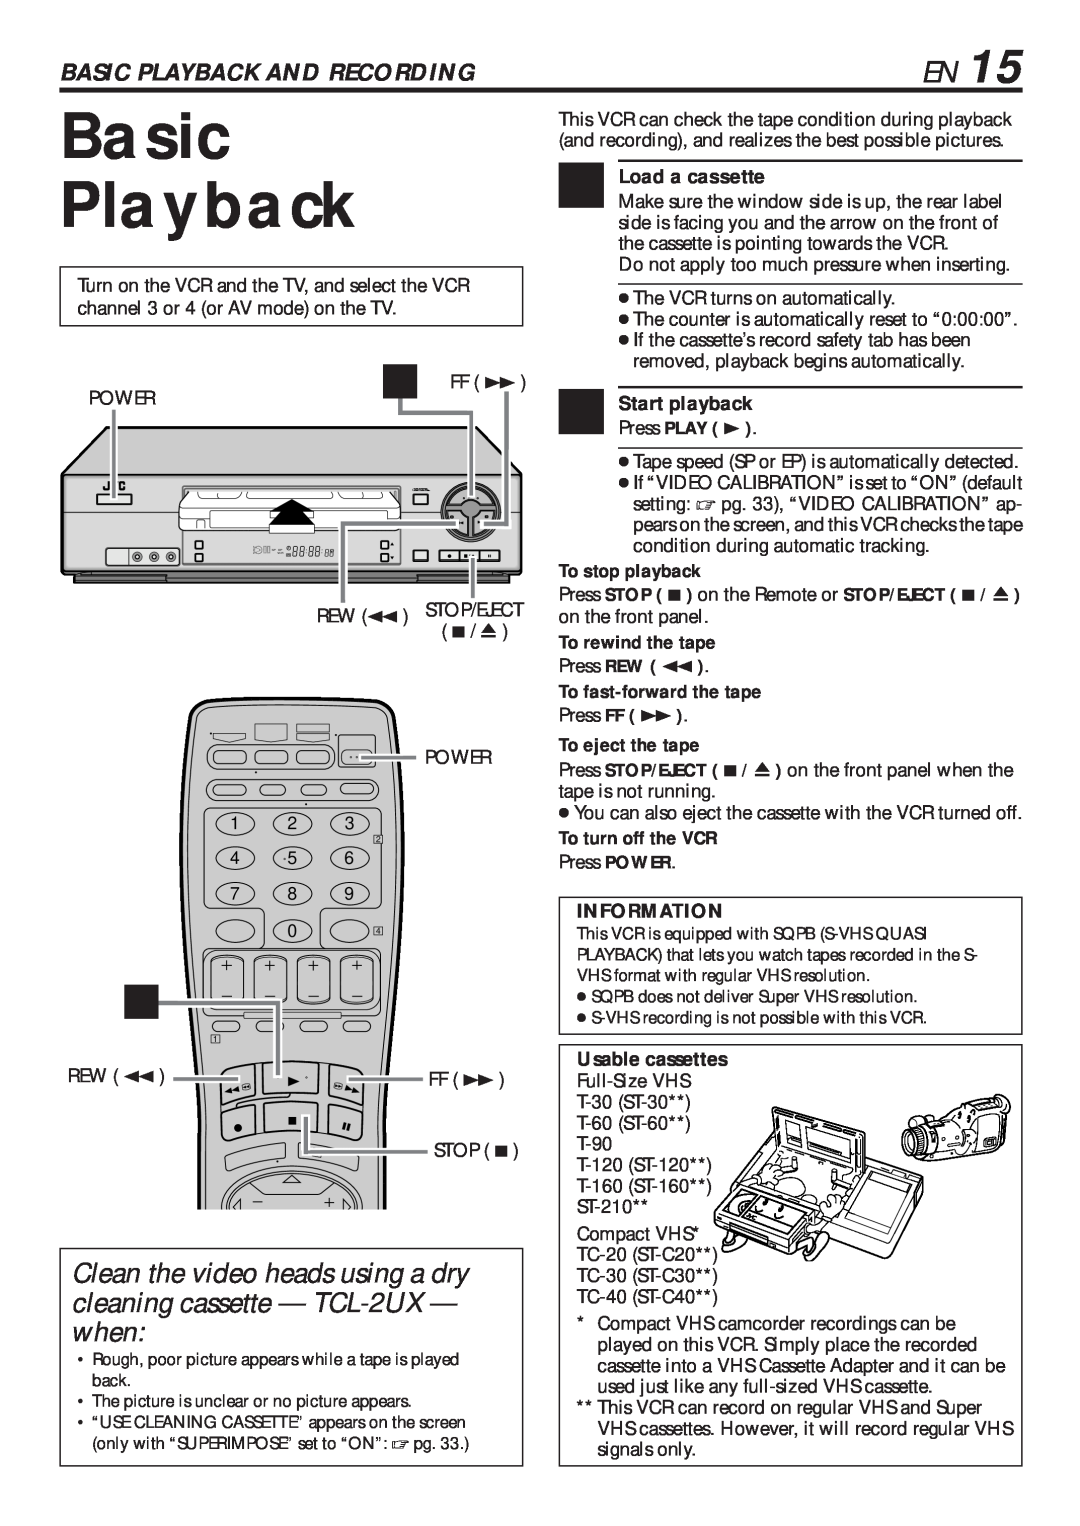 JVC HR-VP682U Basic Playback And Recording, Load a cassette, To stop playback, To rewind the tape, To eject the tape 